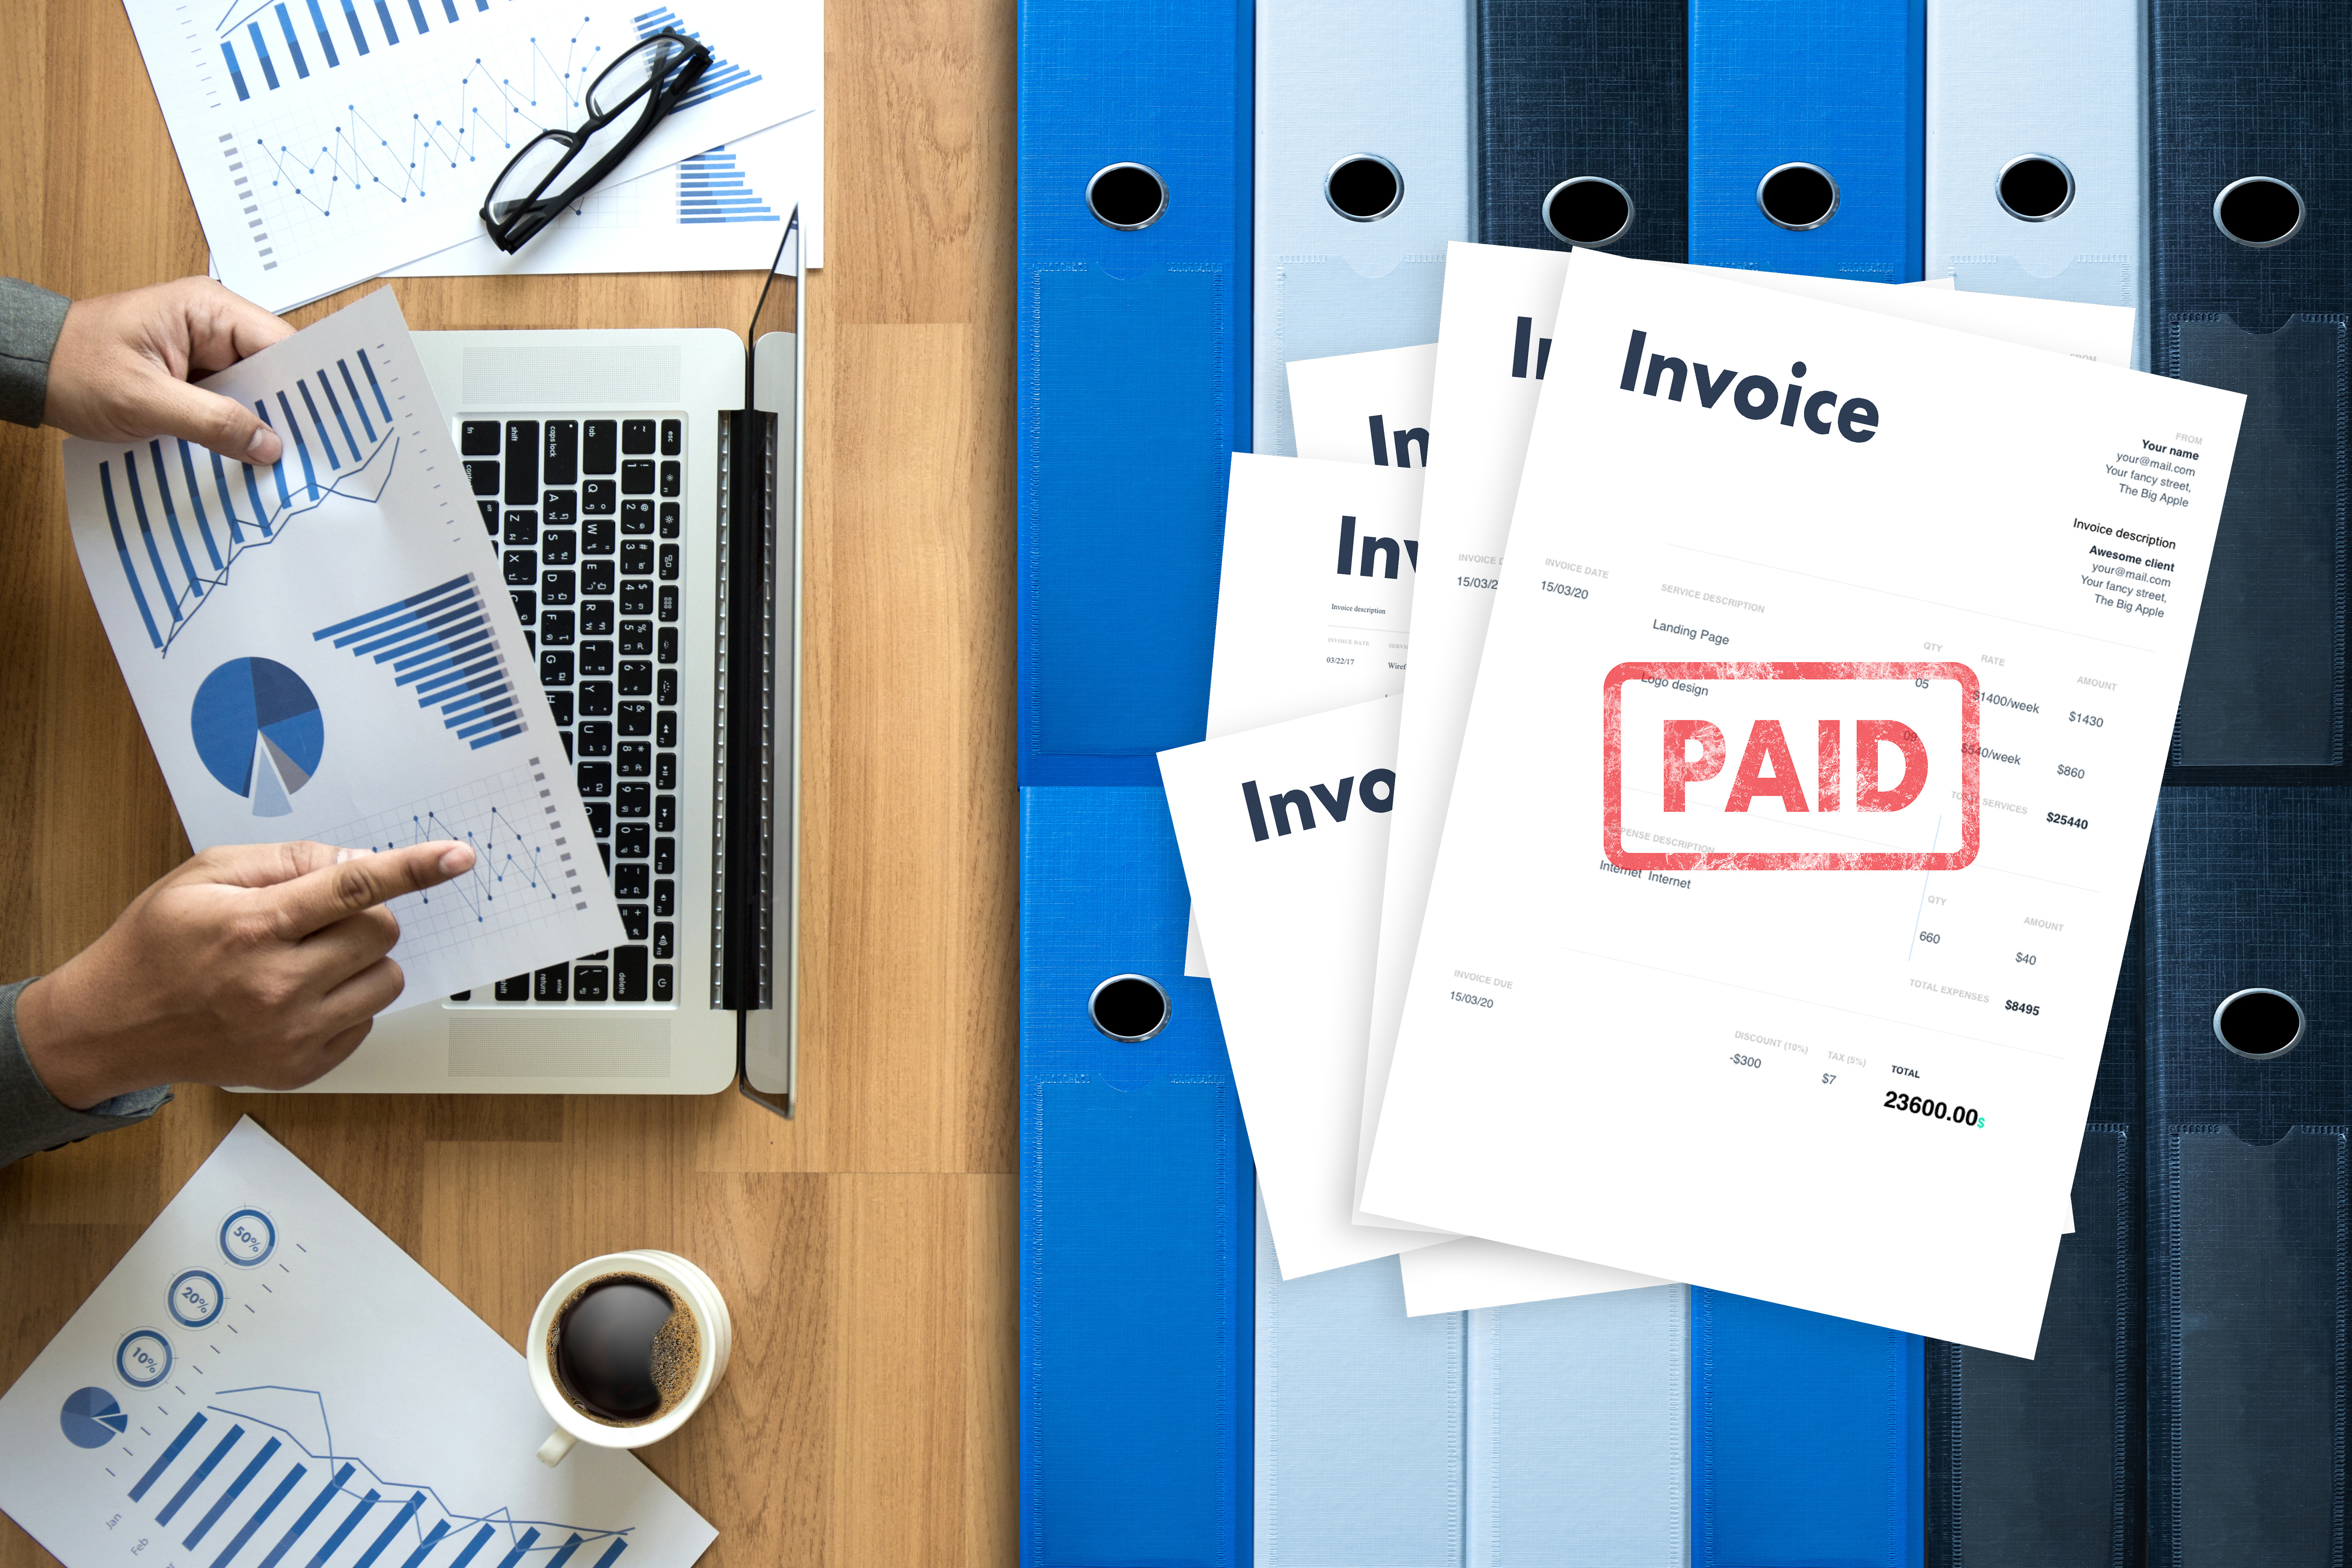 Paid  Invoice - Bill Payment At Office